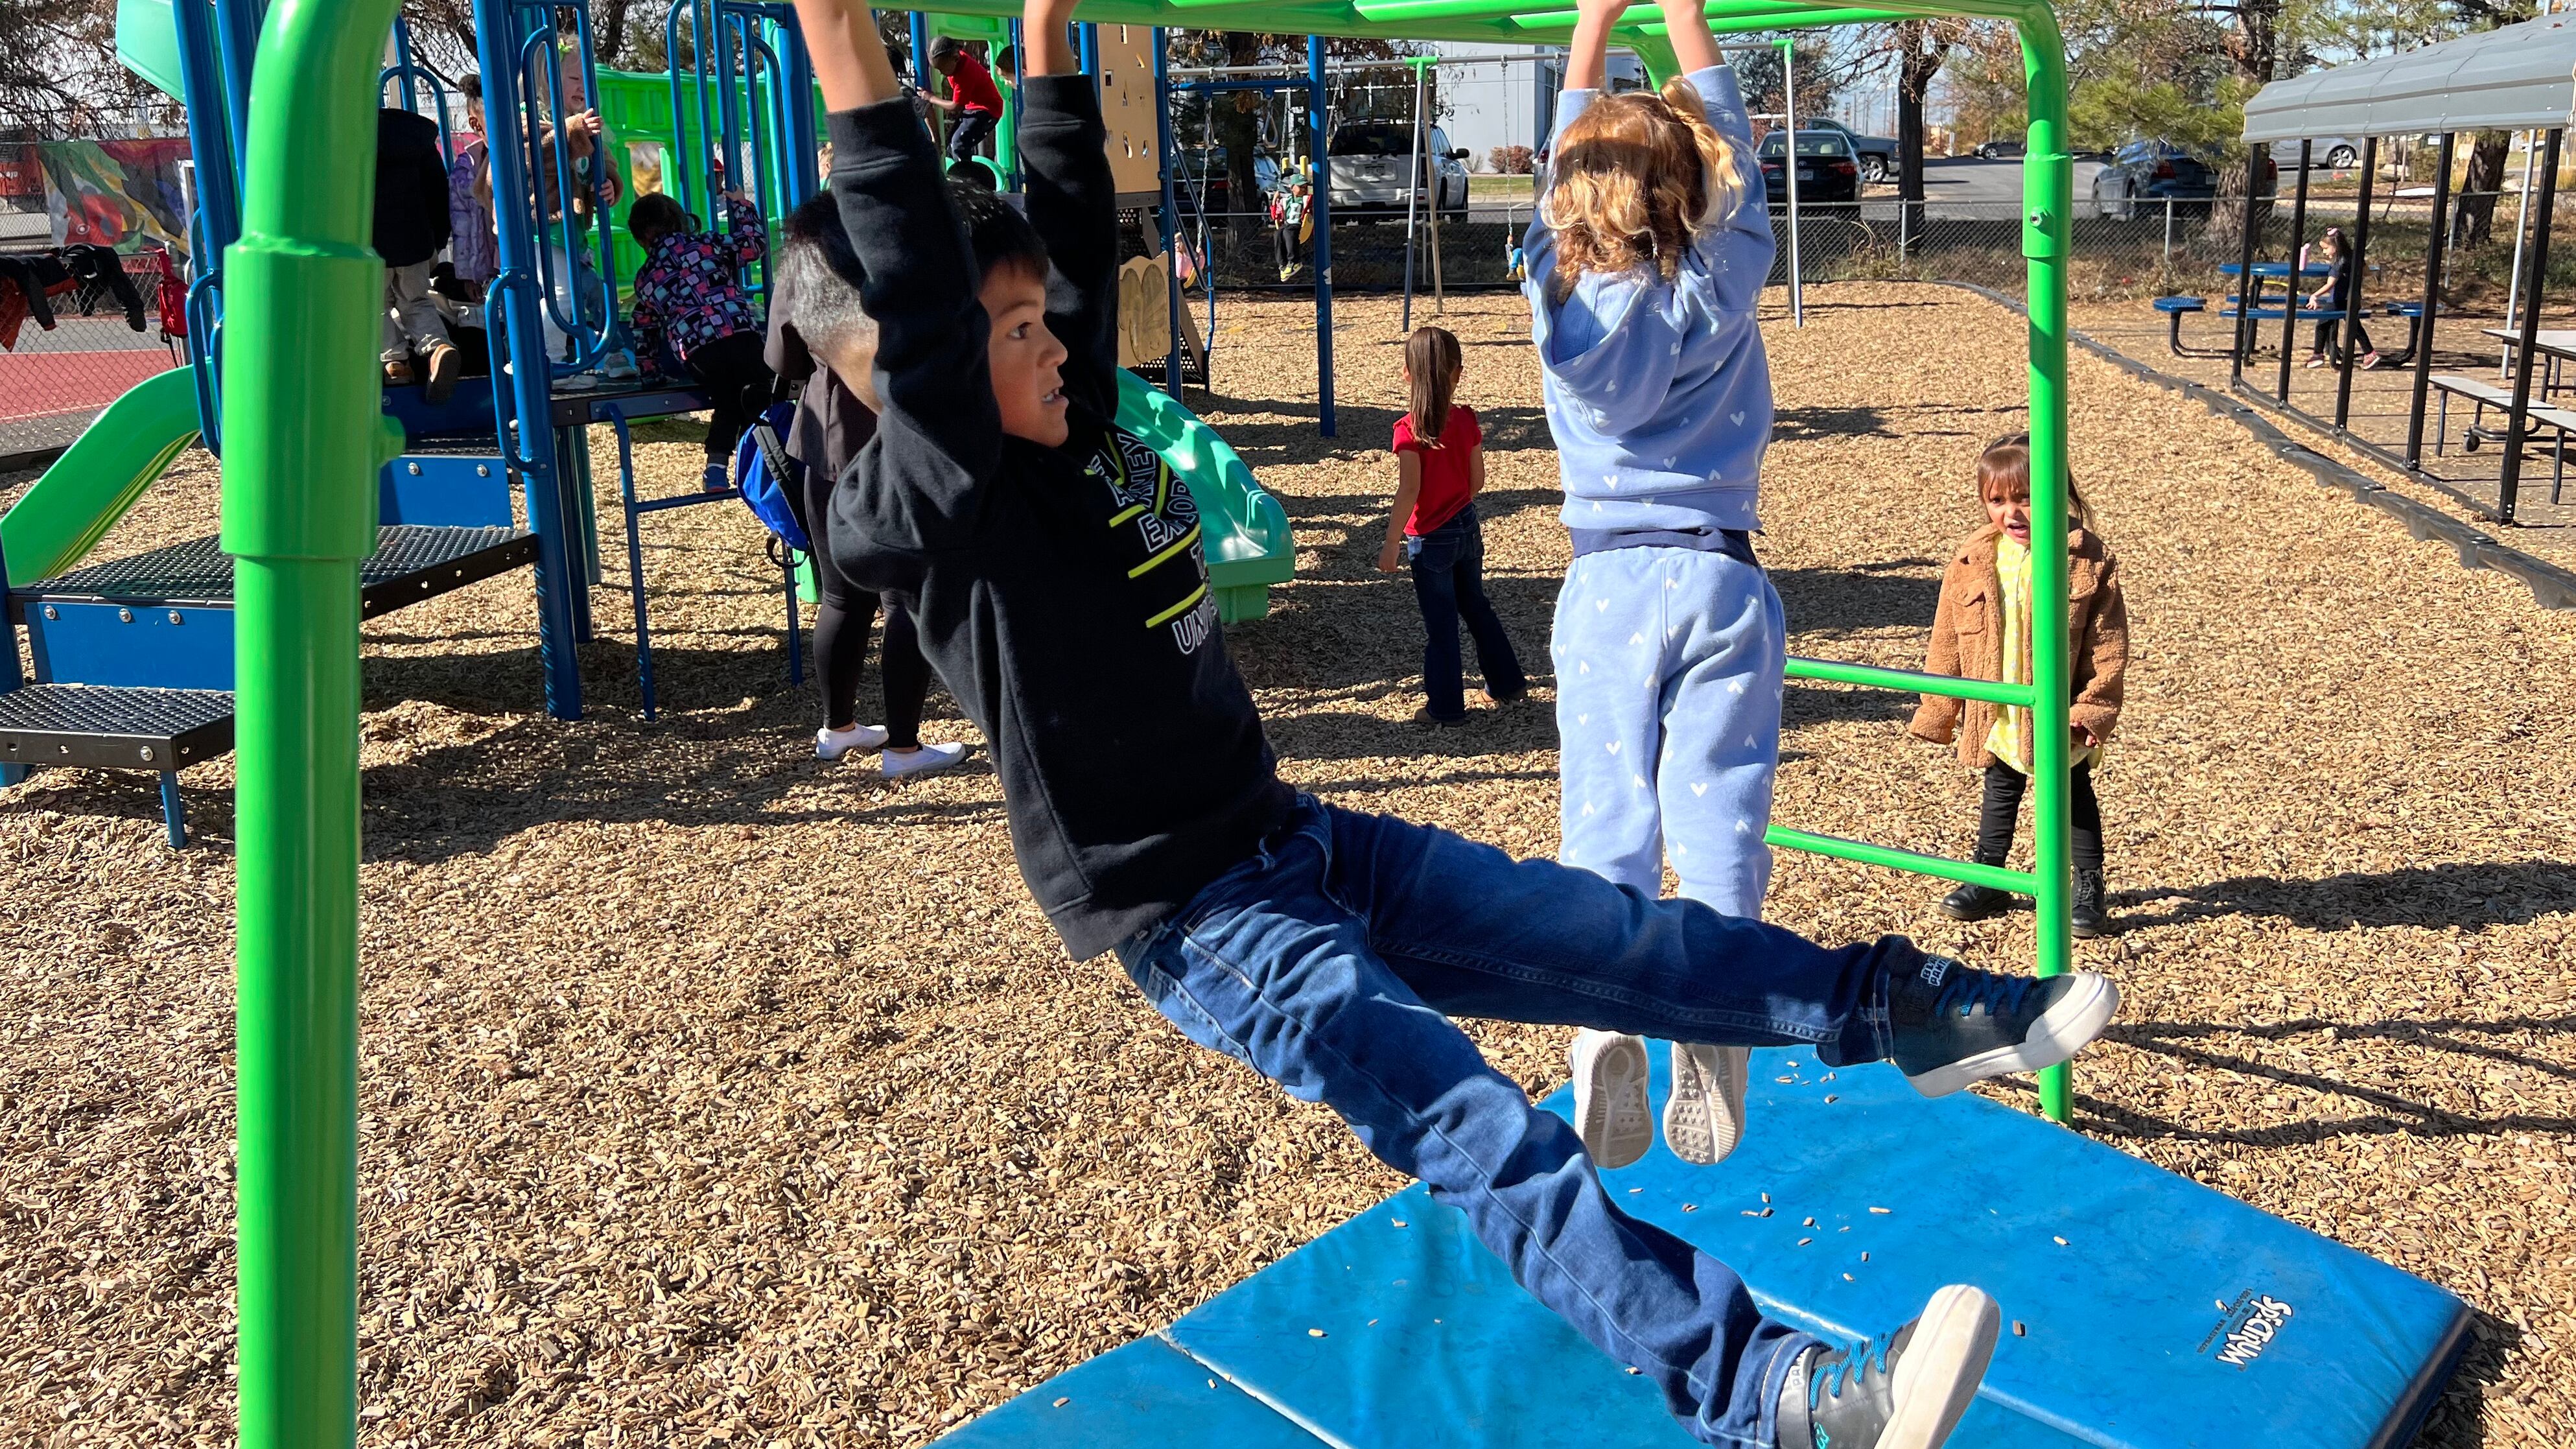 Two young kinds swing on bars at a playground outside with other young students in the background.